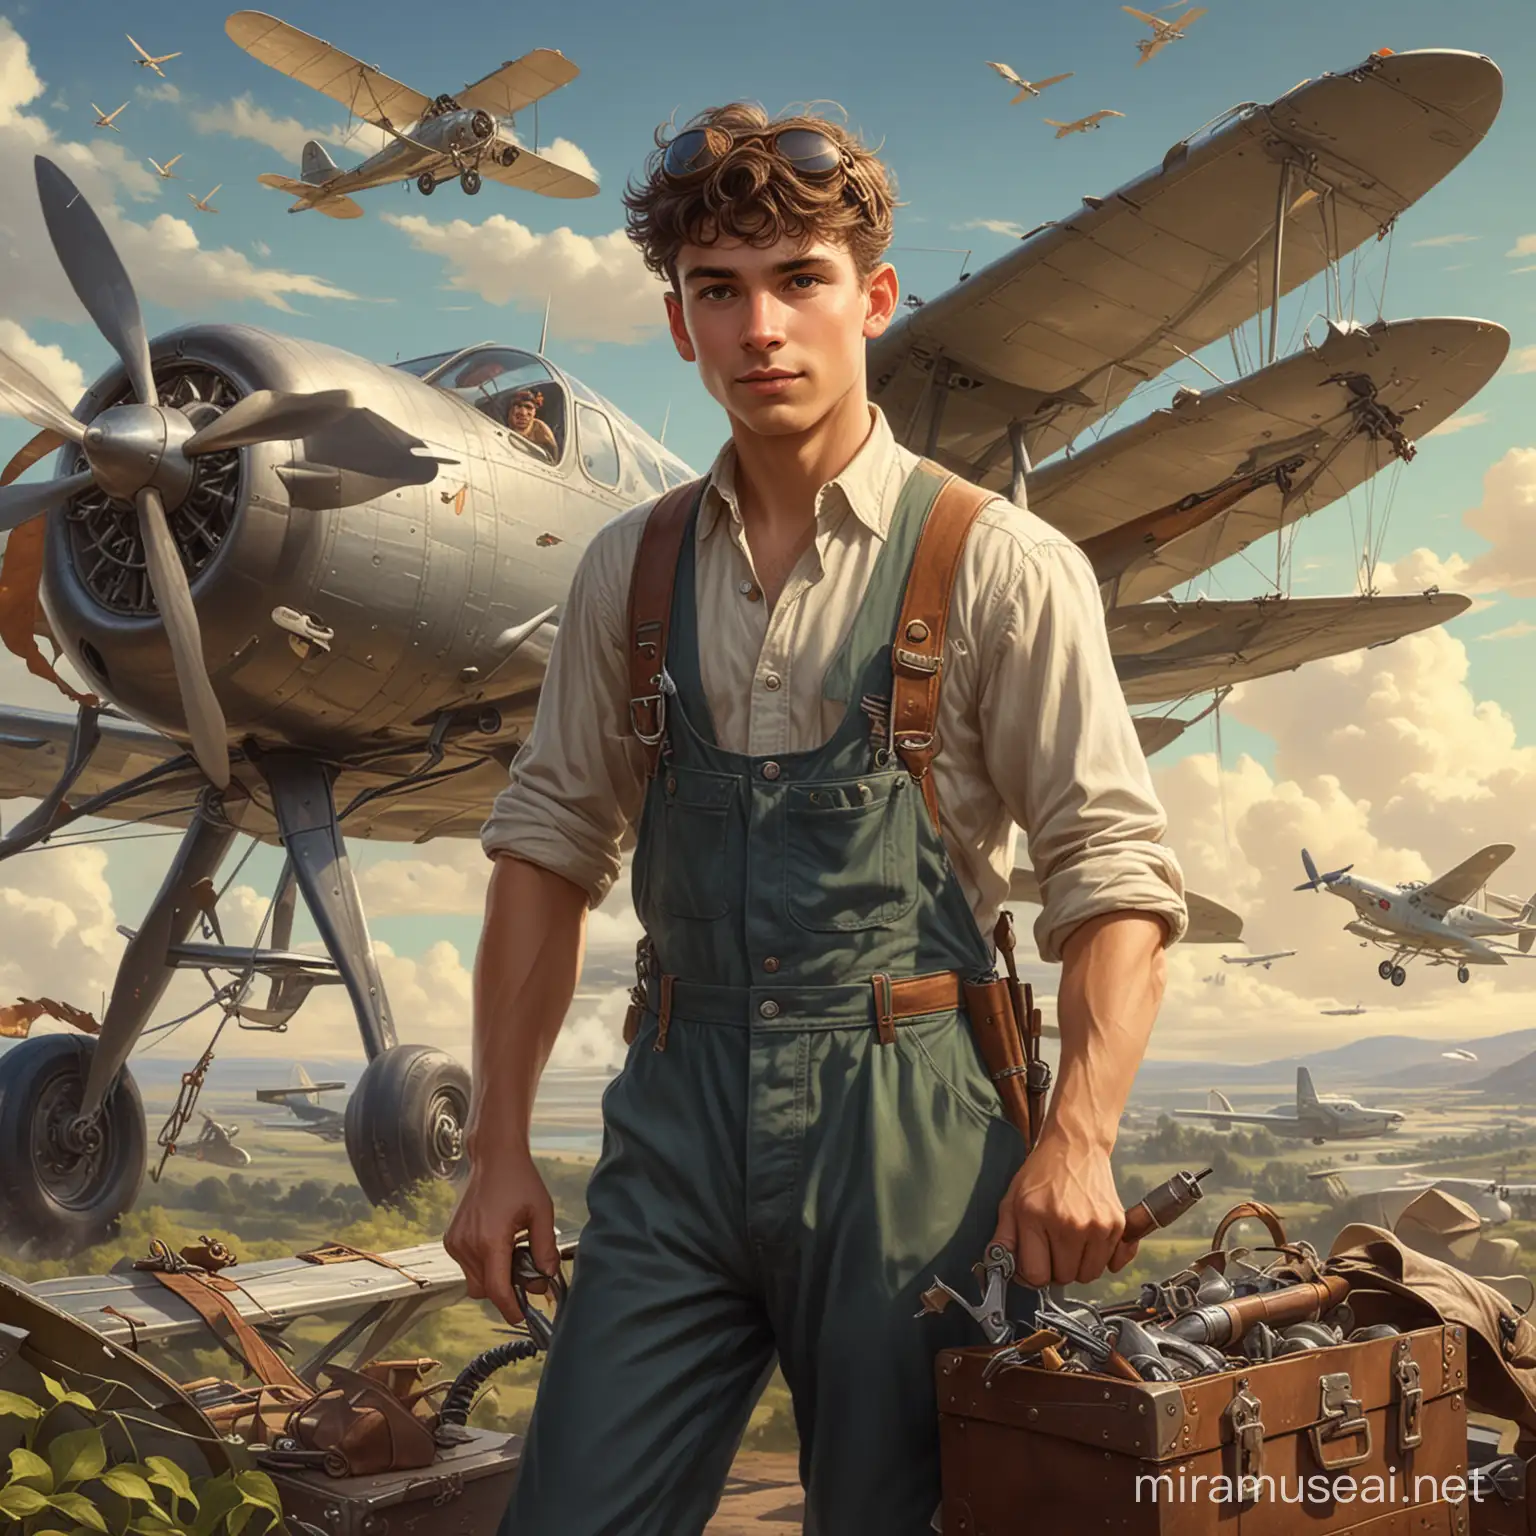 Art nouveau style, handsome young aircraft mechanic, airplane gremlin stealing tools, working, magical world, aviation